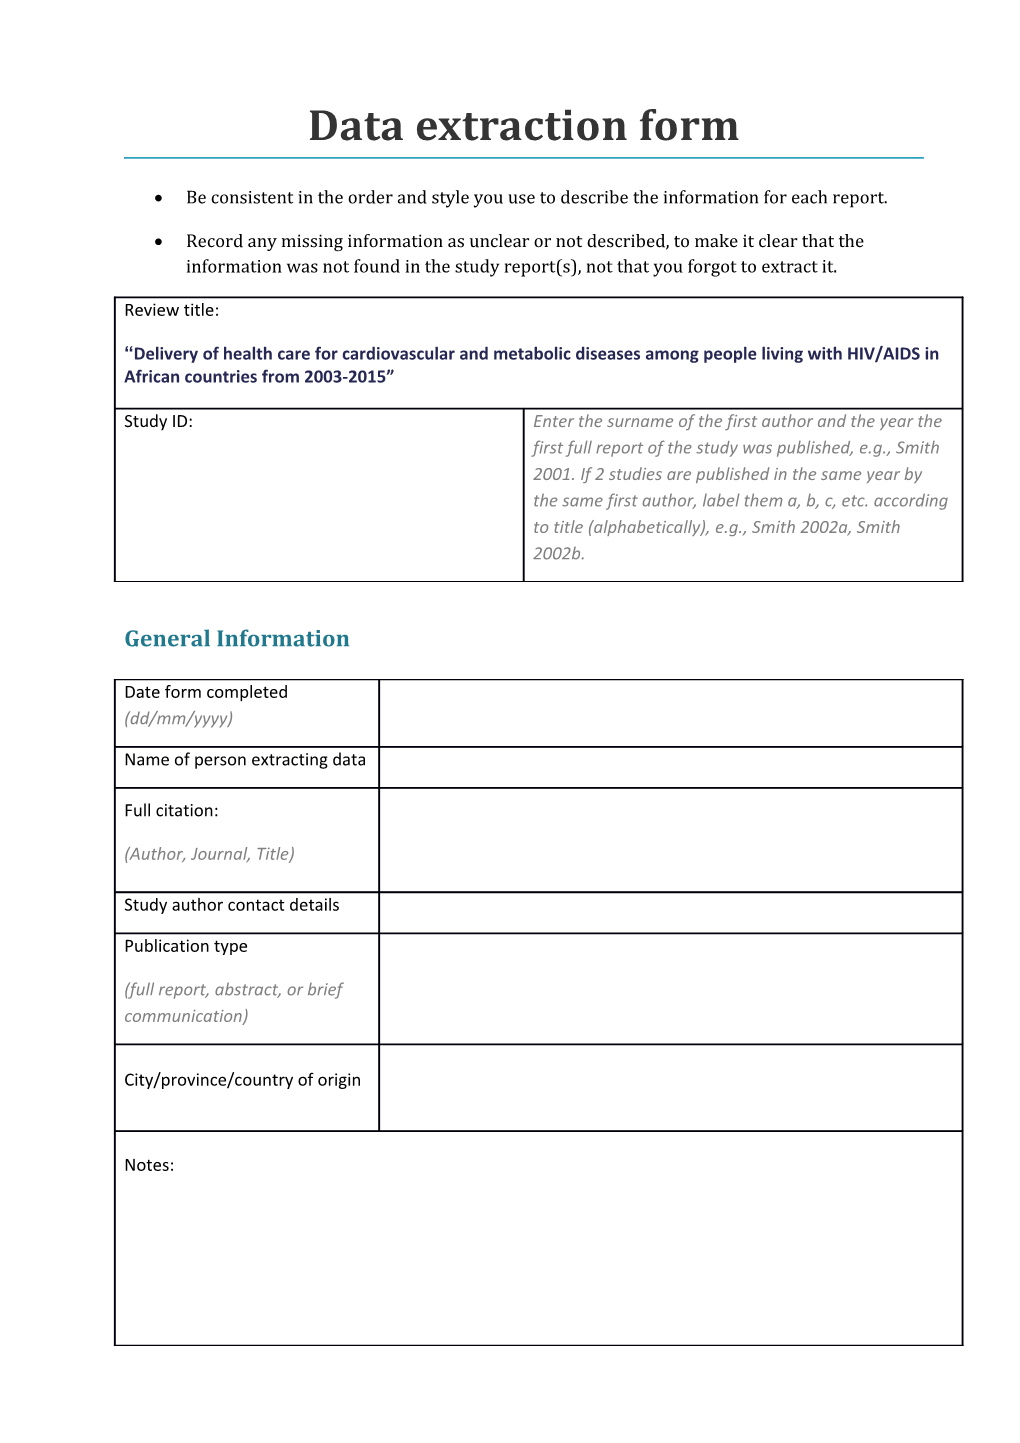 Data Extraction and Assessment Form - Template s1